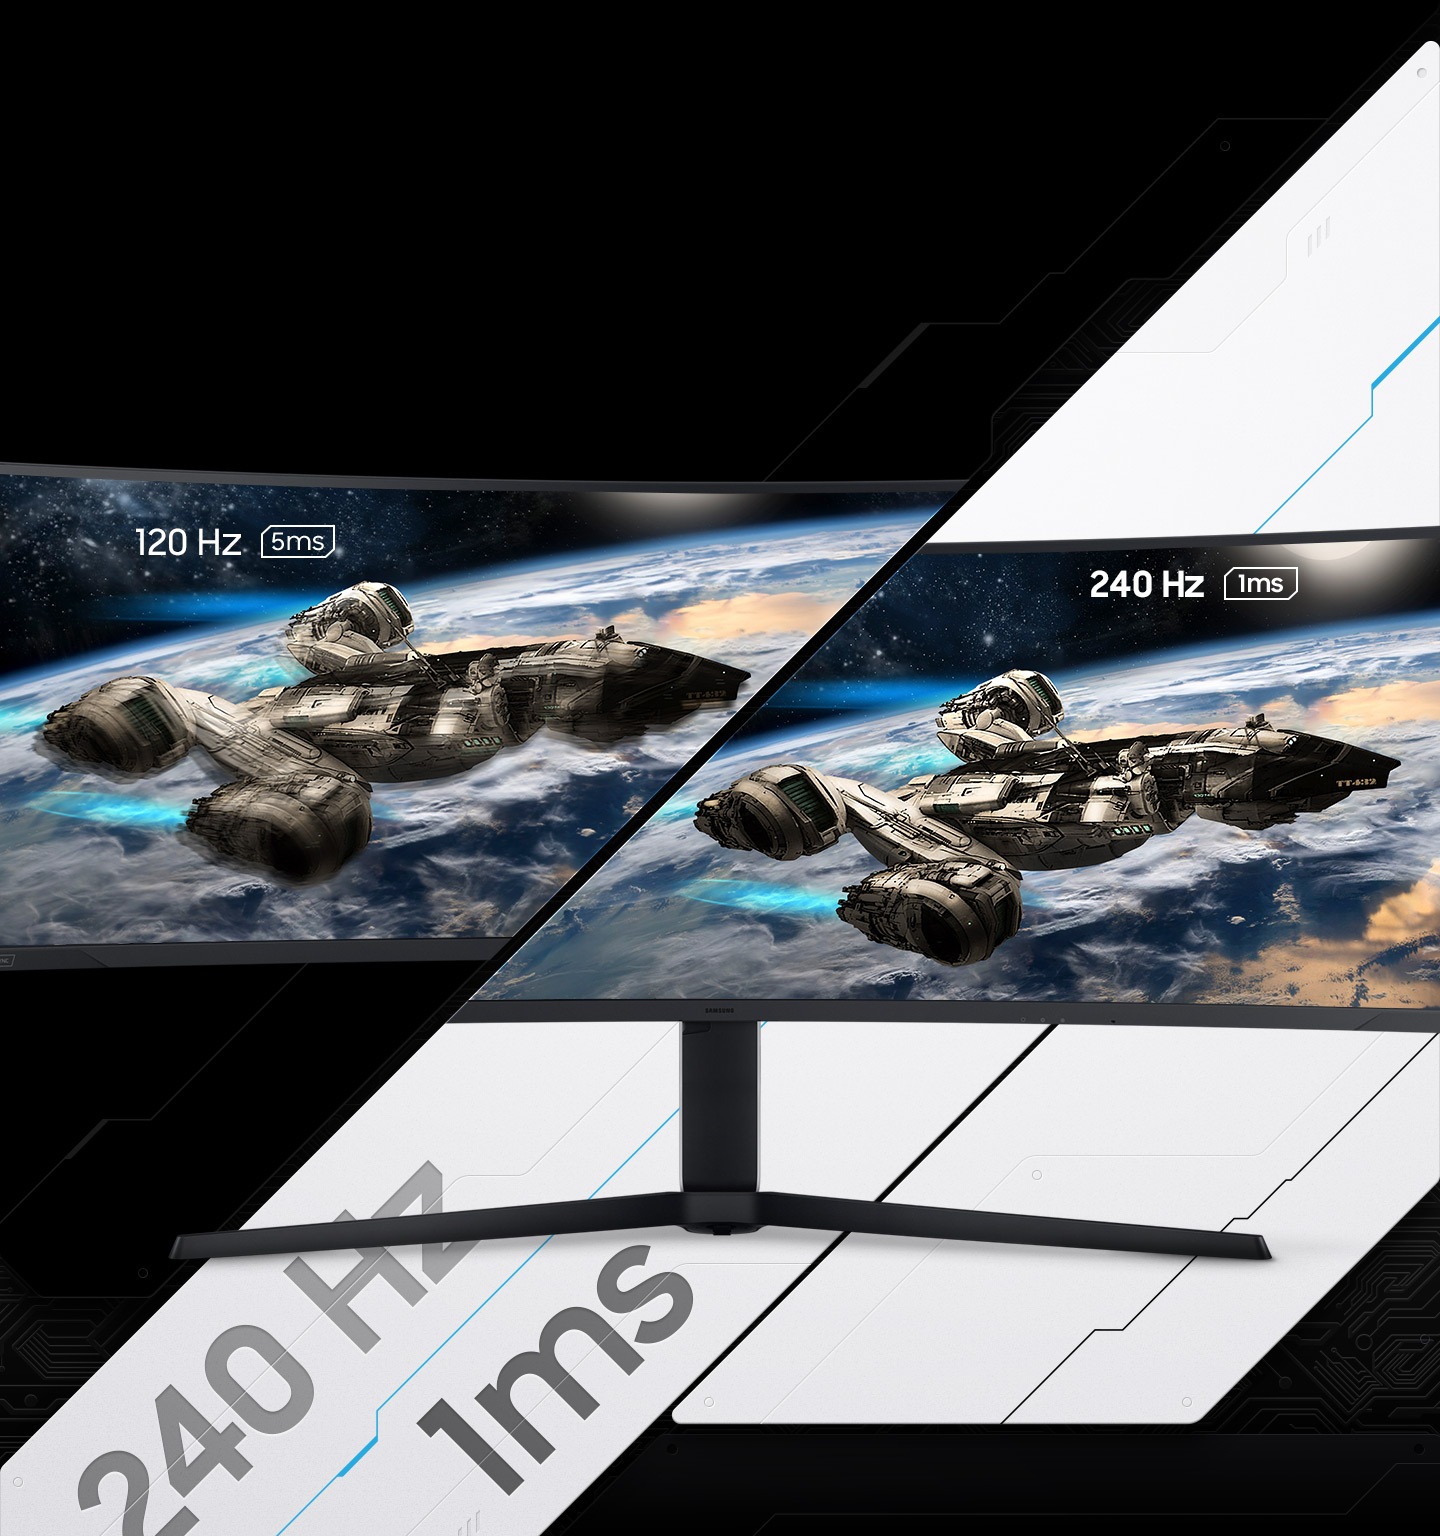 A G95NA monitor shows two spaceships blasting off into space. The monitor is split in two to show the difference in display quality comparing two different refresh rates and response time, one with 120Hz and 5ms and the other with 240Hz and 1ms which shows fewer lagging blurs.